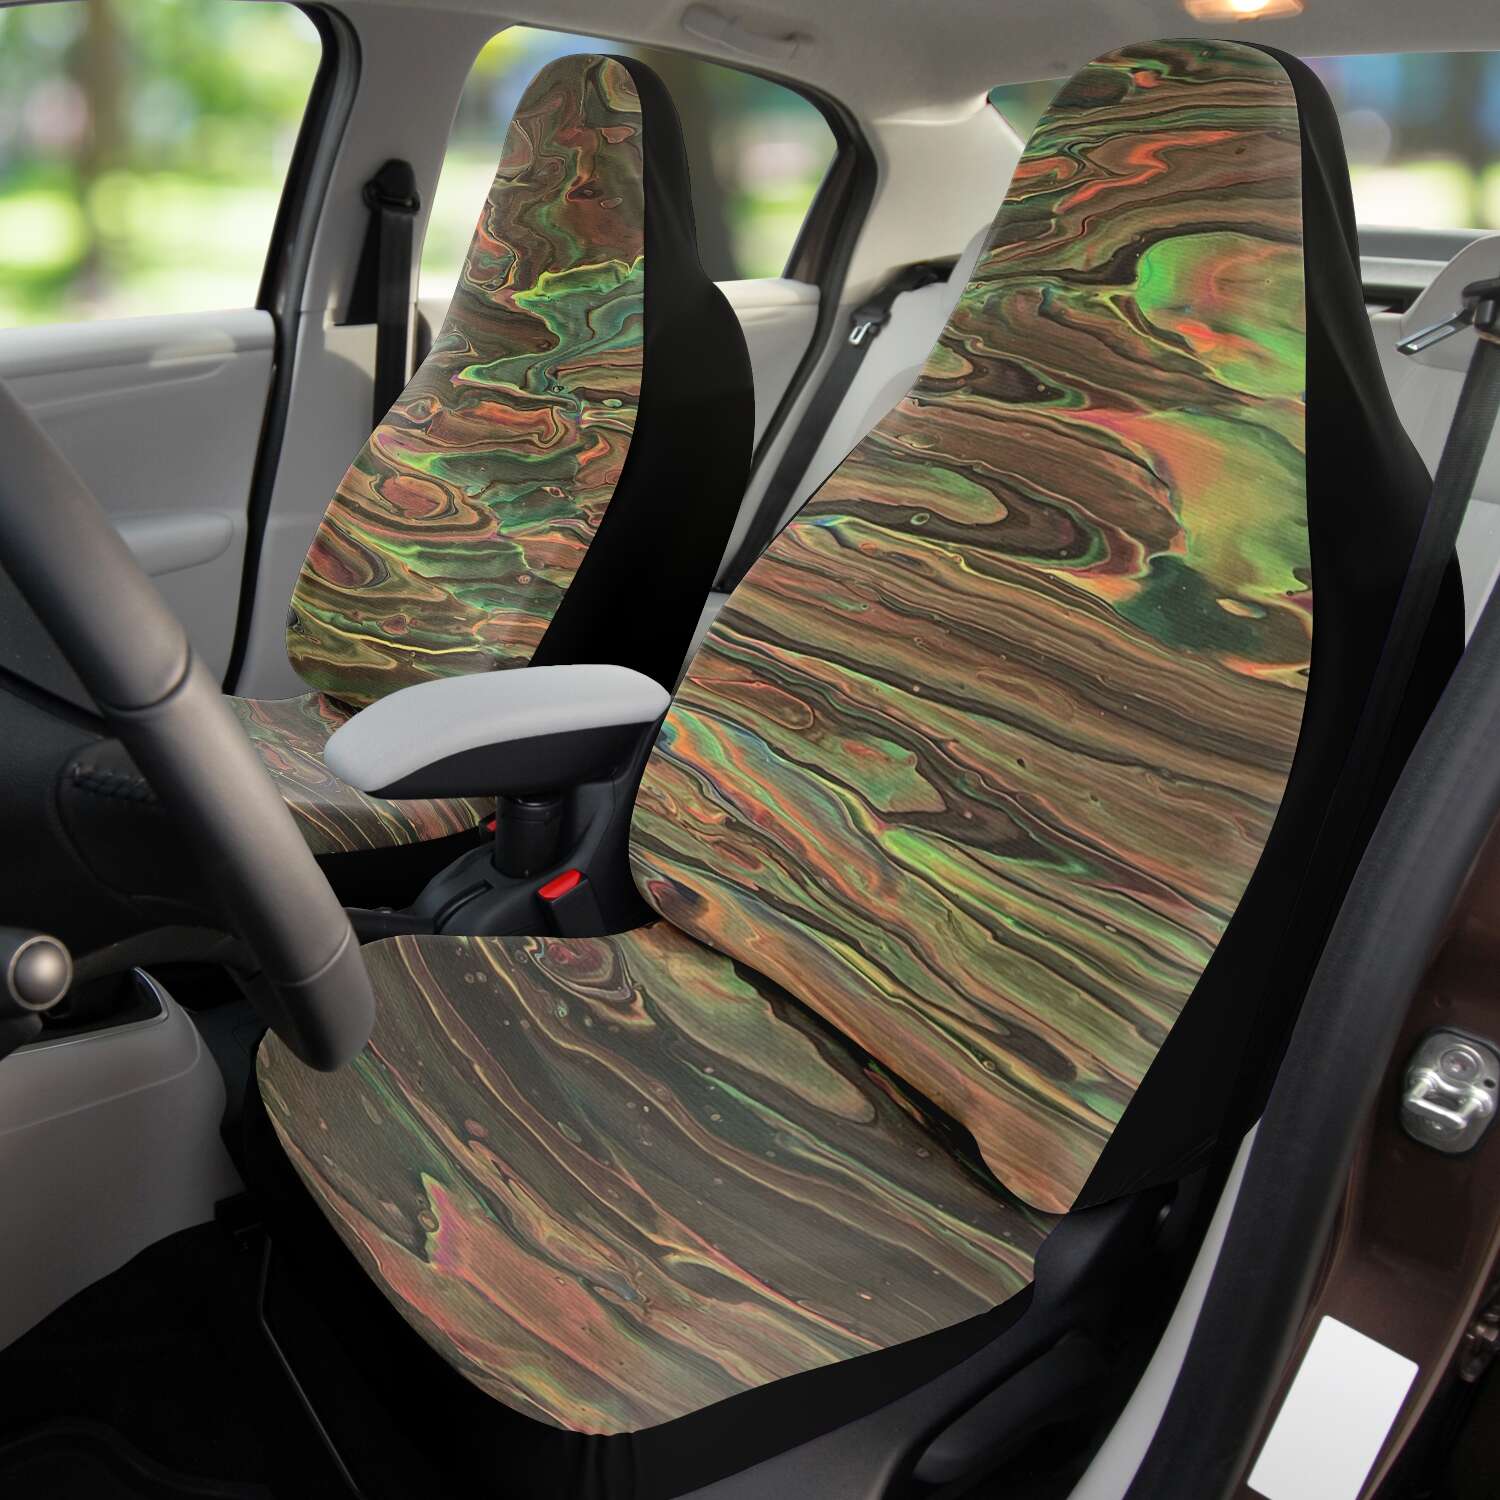 Unique Vehicle Seat Covers With Abstract Fluid Art Designs